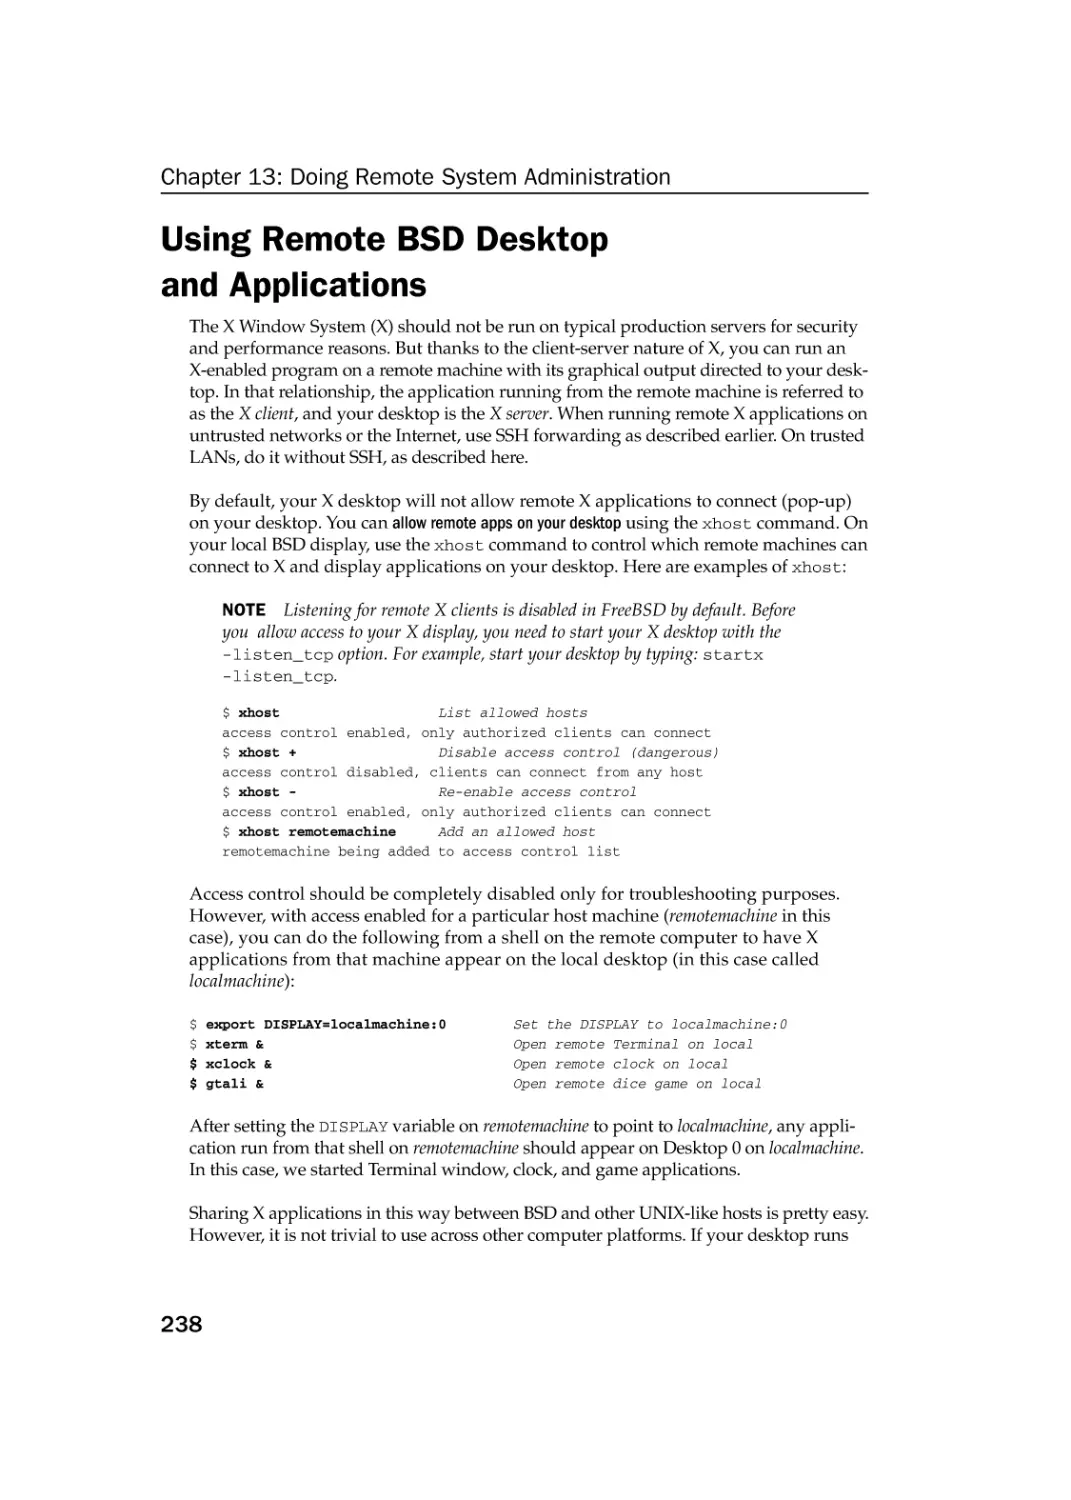 Using Remote BSD Desktop and Applications